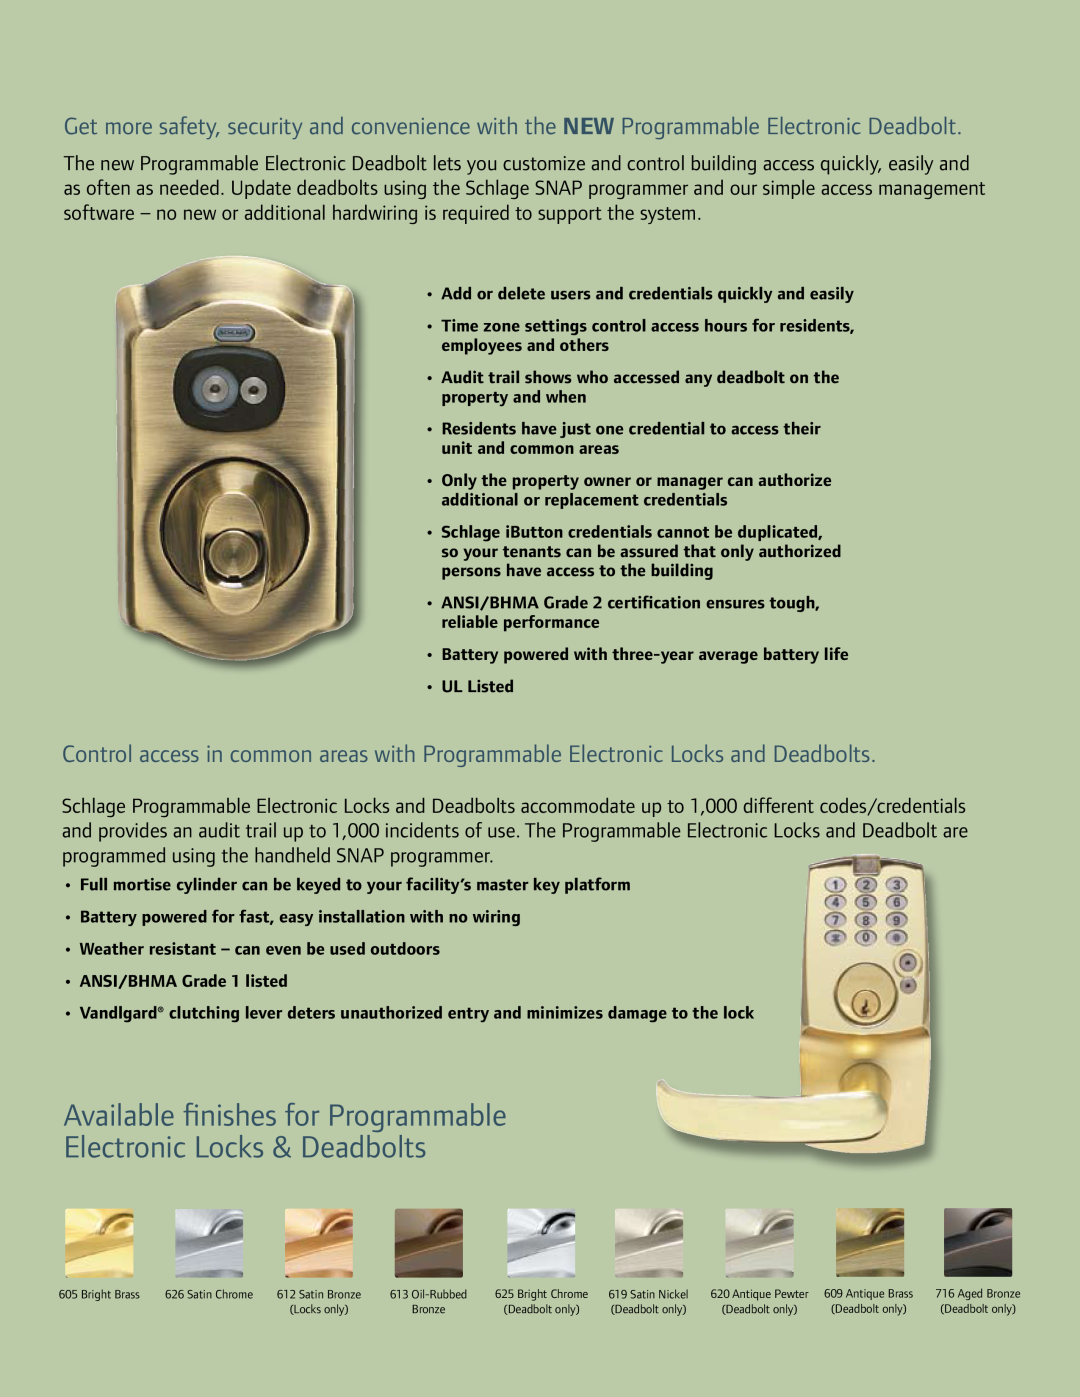 Ingersoll-Rand Schlage manual Available finishes for Programmable, Electronic Locks & Deadbolts 